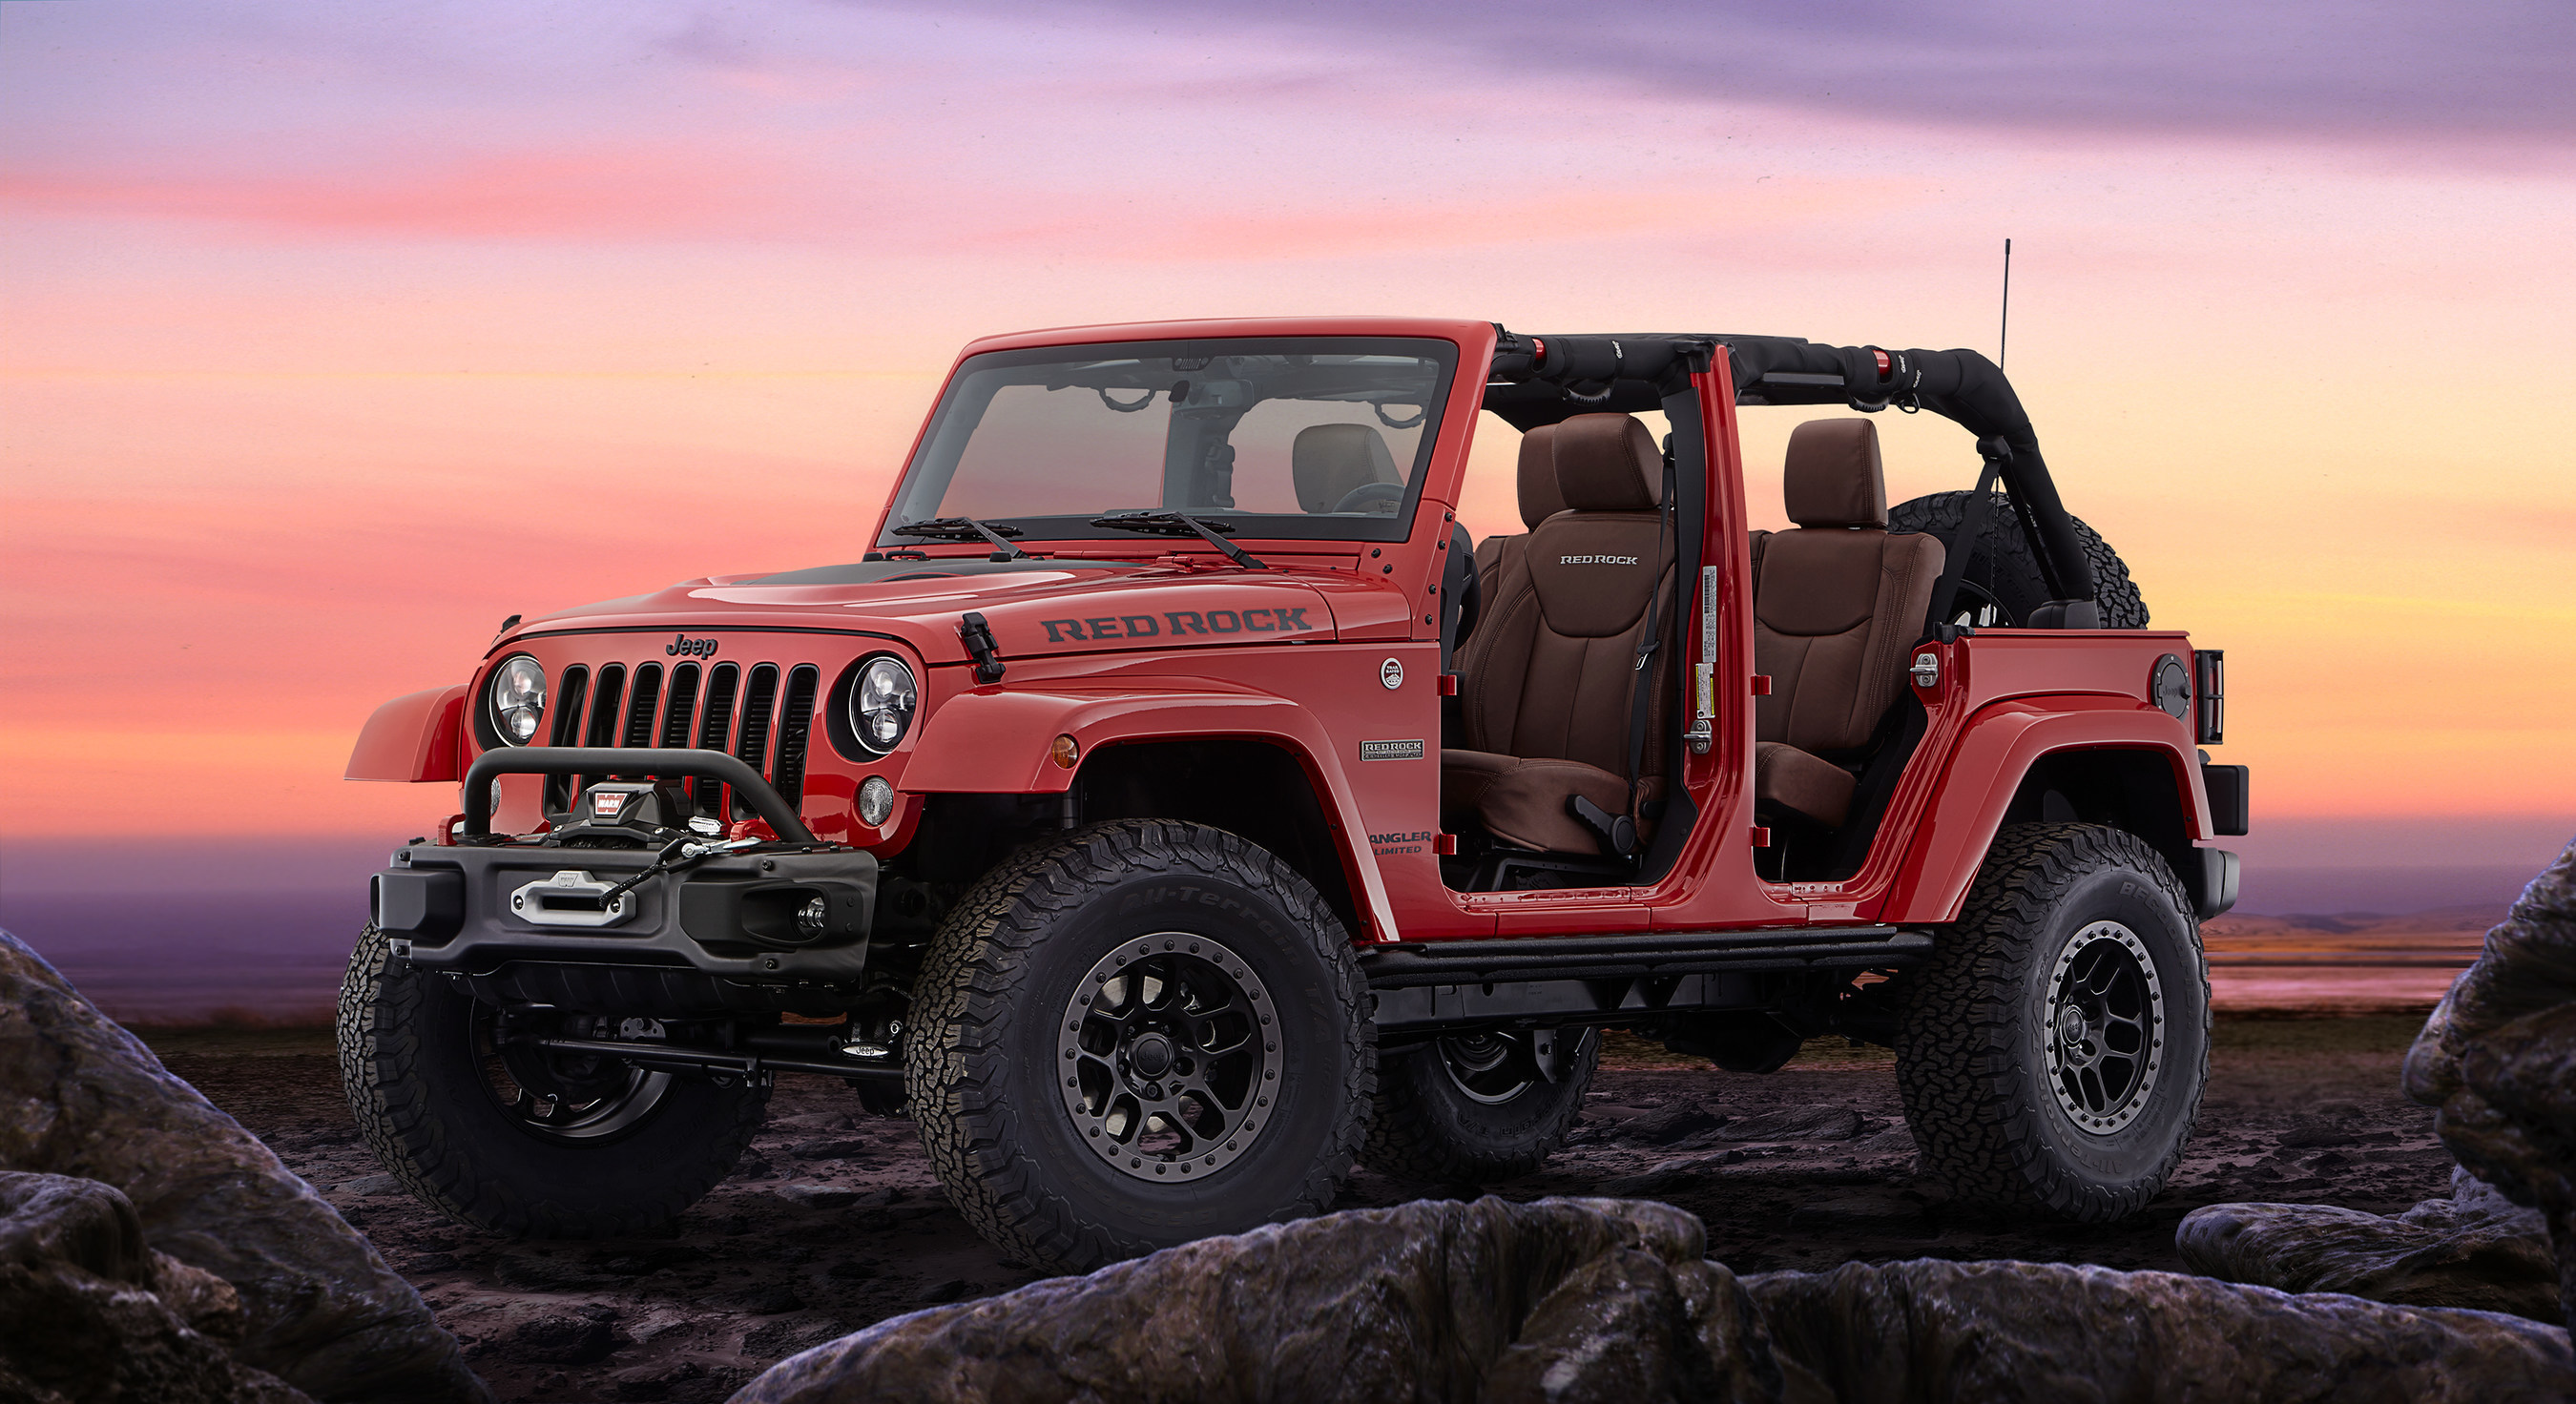 Jeep® and Mopar Introduce Wrangler Red Rock Concept at SEMA Show